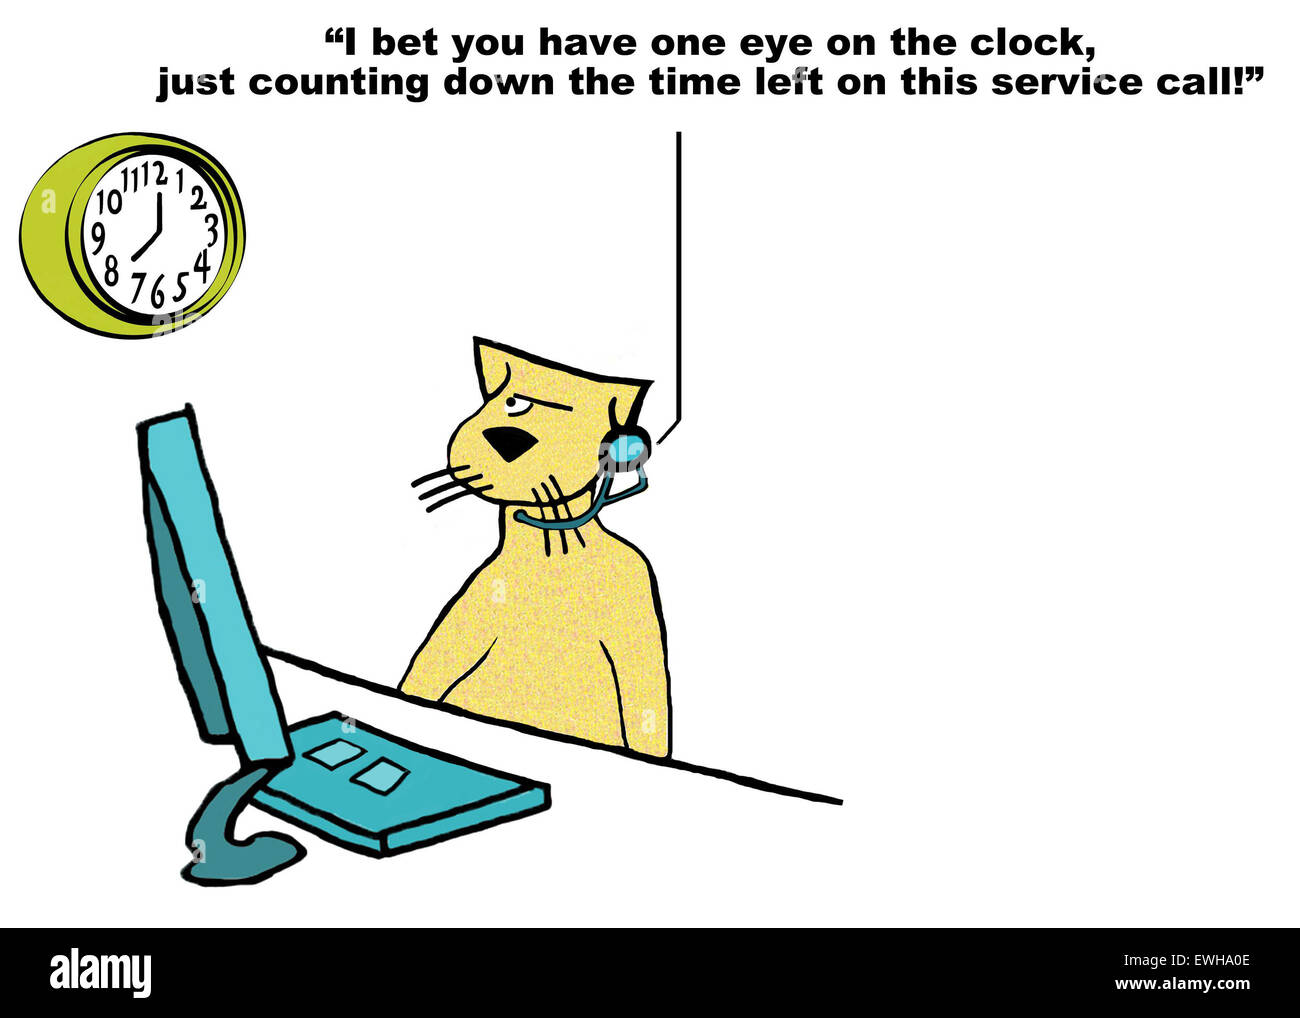 Business cartoon of customer service cat and caller saying, '... counting down the time left on this service call'. Stock Photo